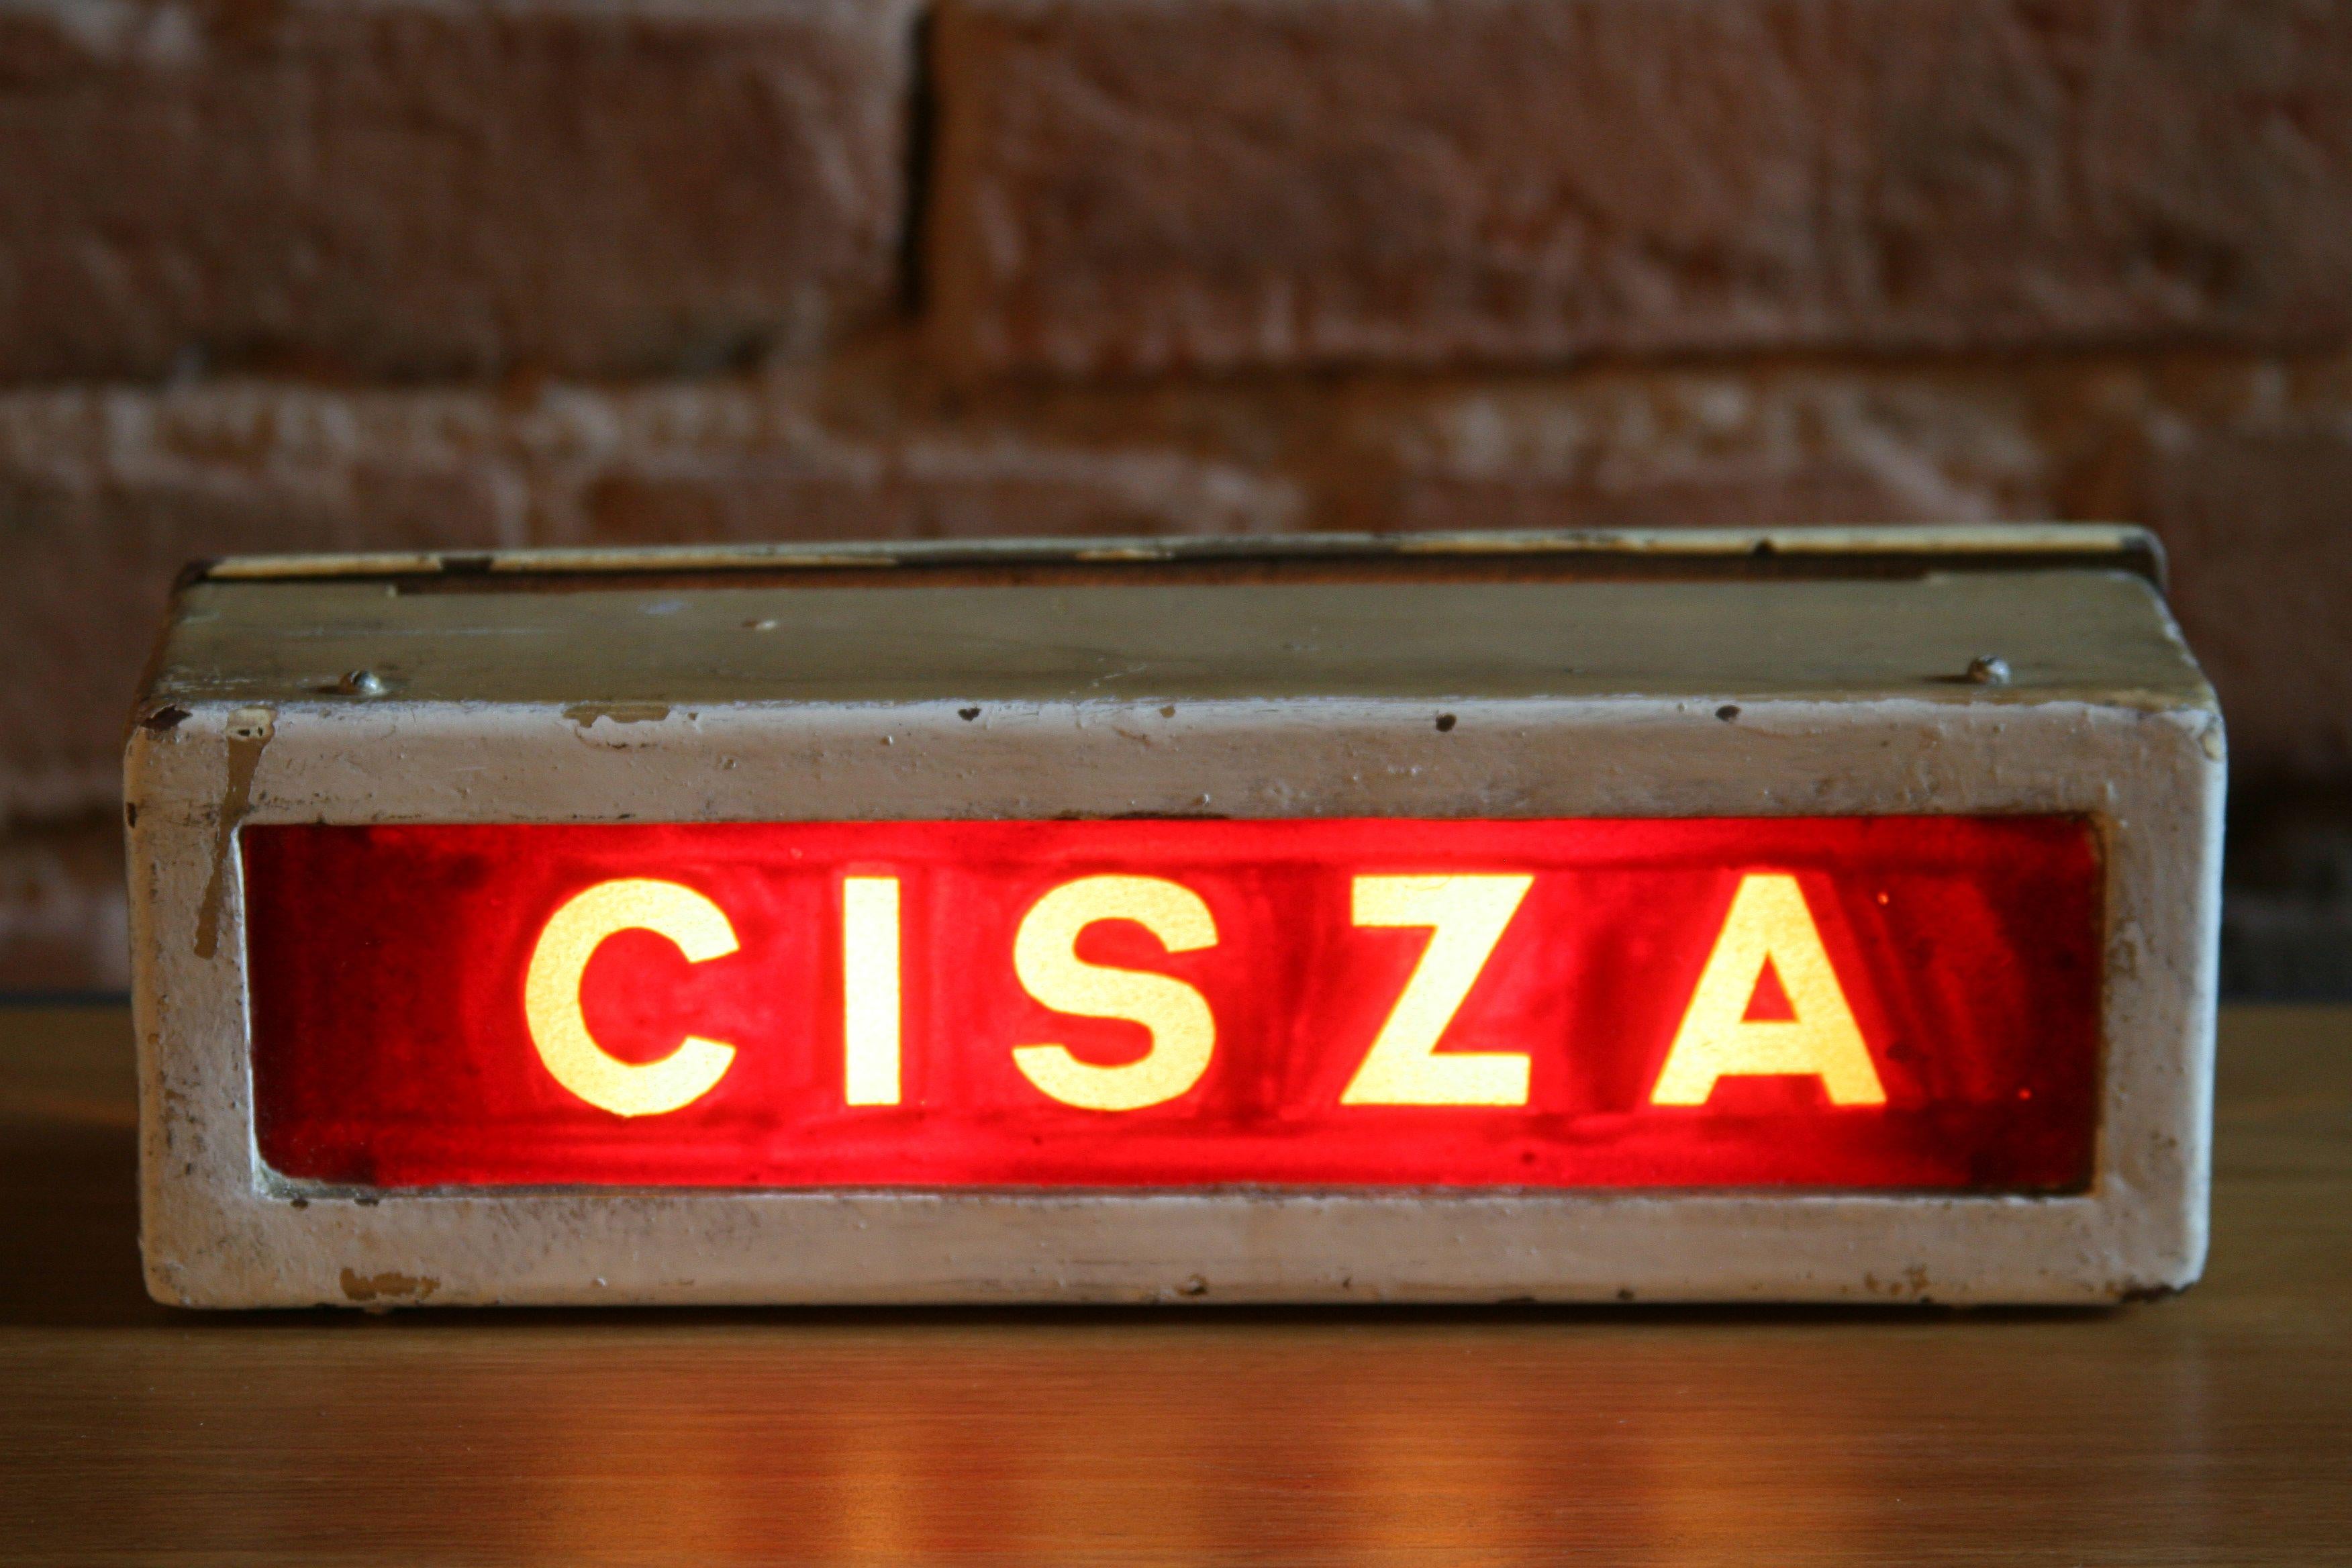 Industrial 1950s Illuminated Theater Sign “CISZA”, Meaning “Silence”